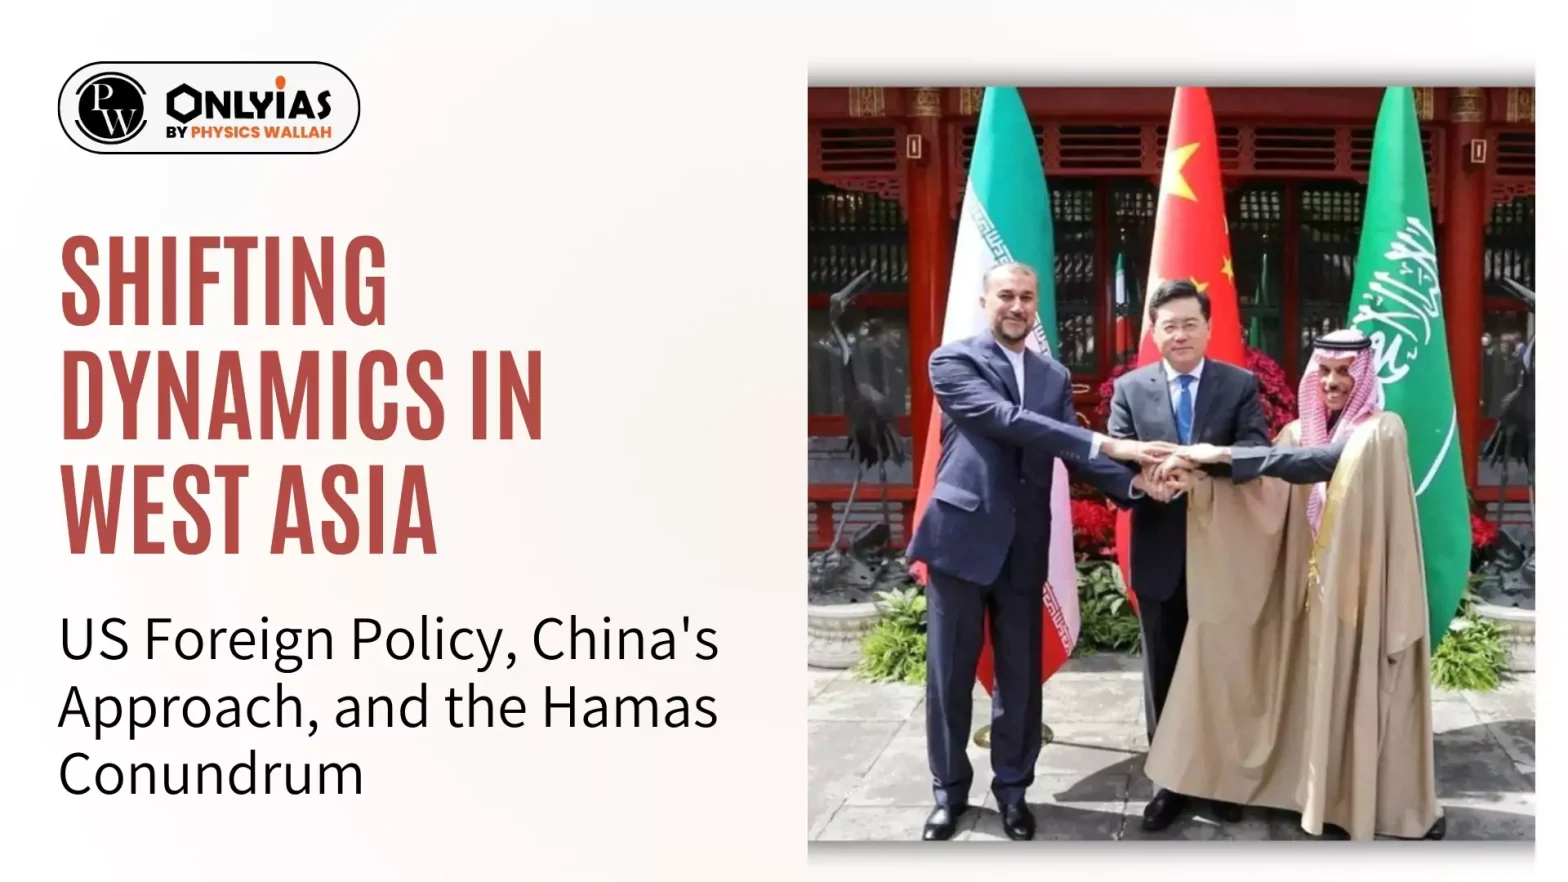 Shifting Dynamics in West Asia: US Foreign Policy, China’s Approach, and the Hamas Conundrum